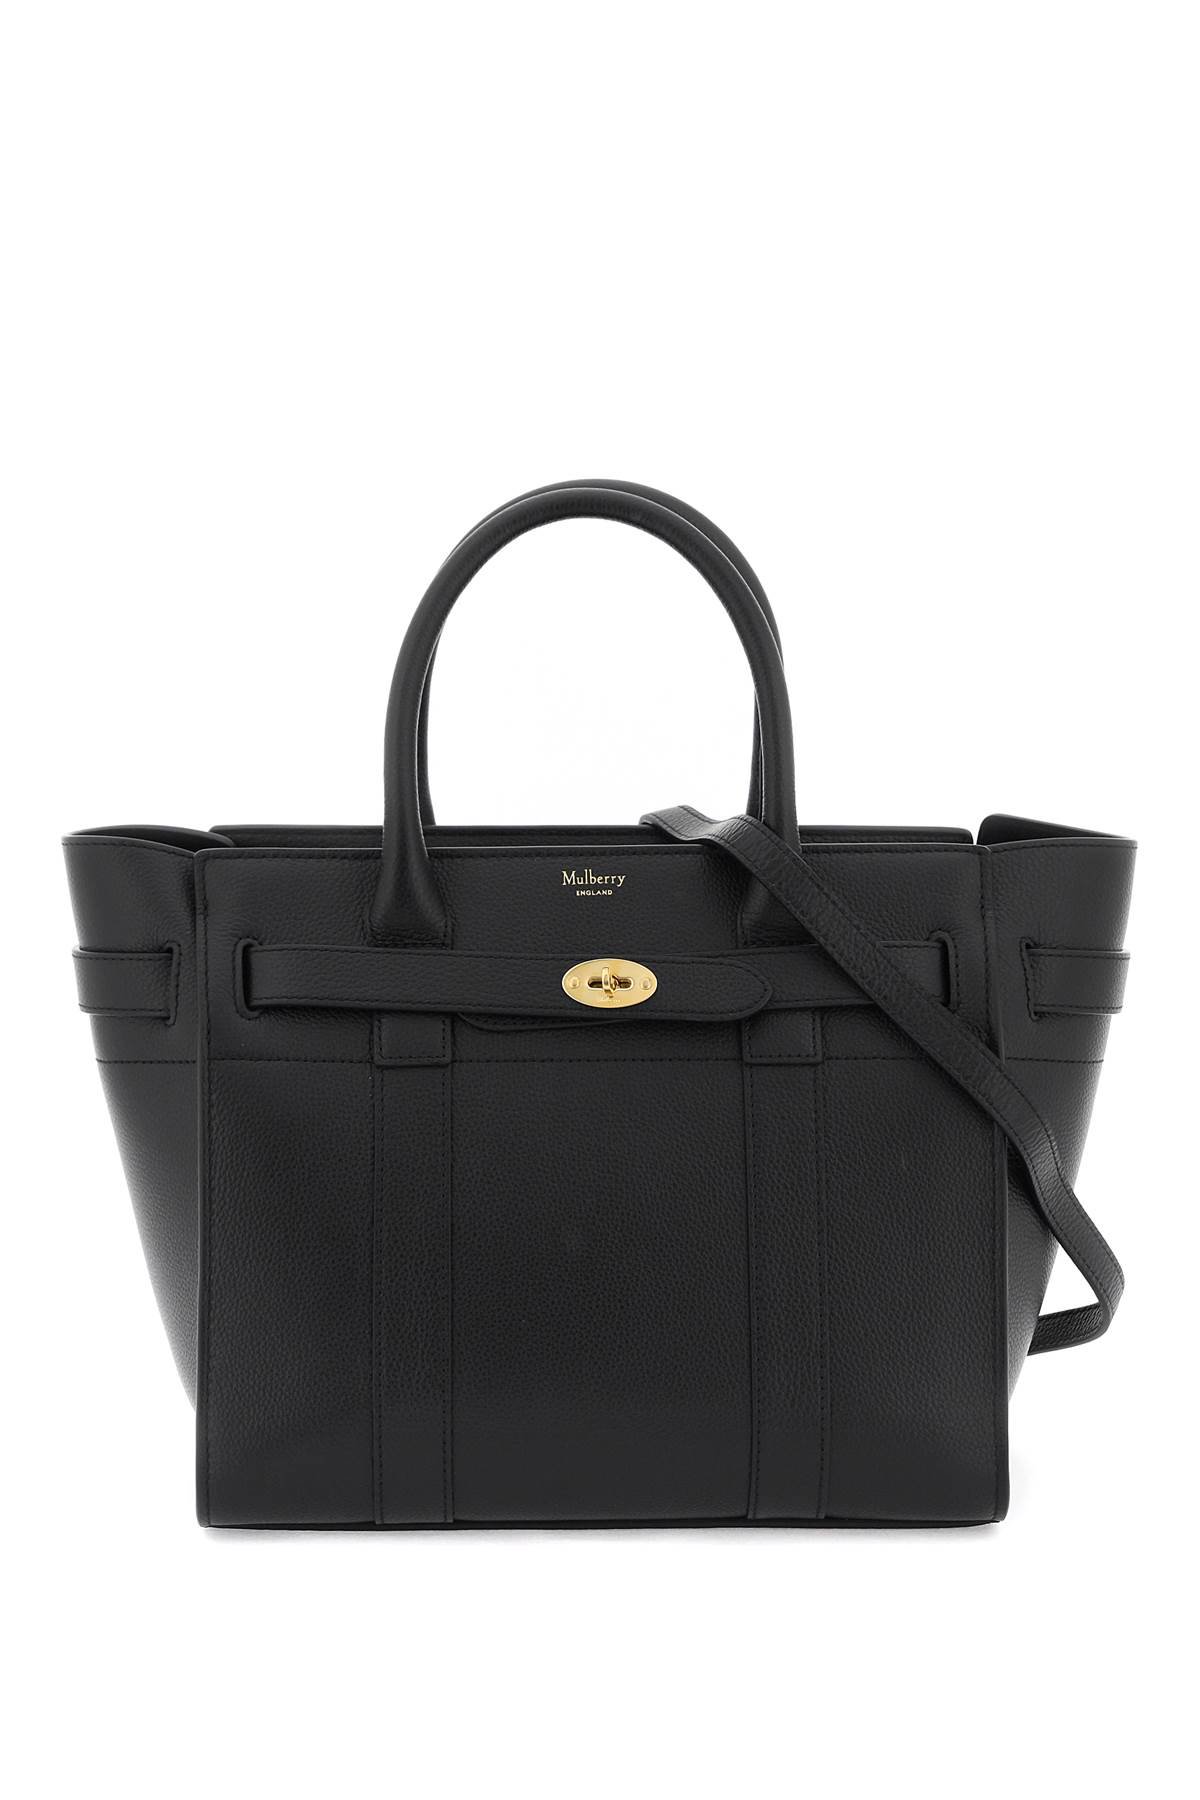 MULBERRY LEATHER ZIPPED BAYSWATER BLACK SHOULDER BAG | MULBERRY WOMEN ...